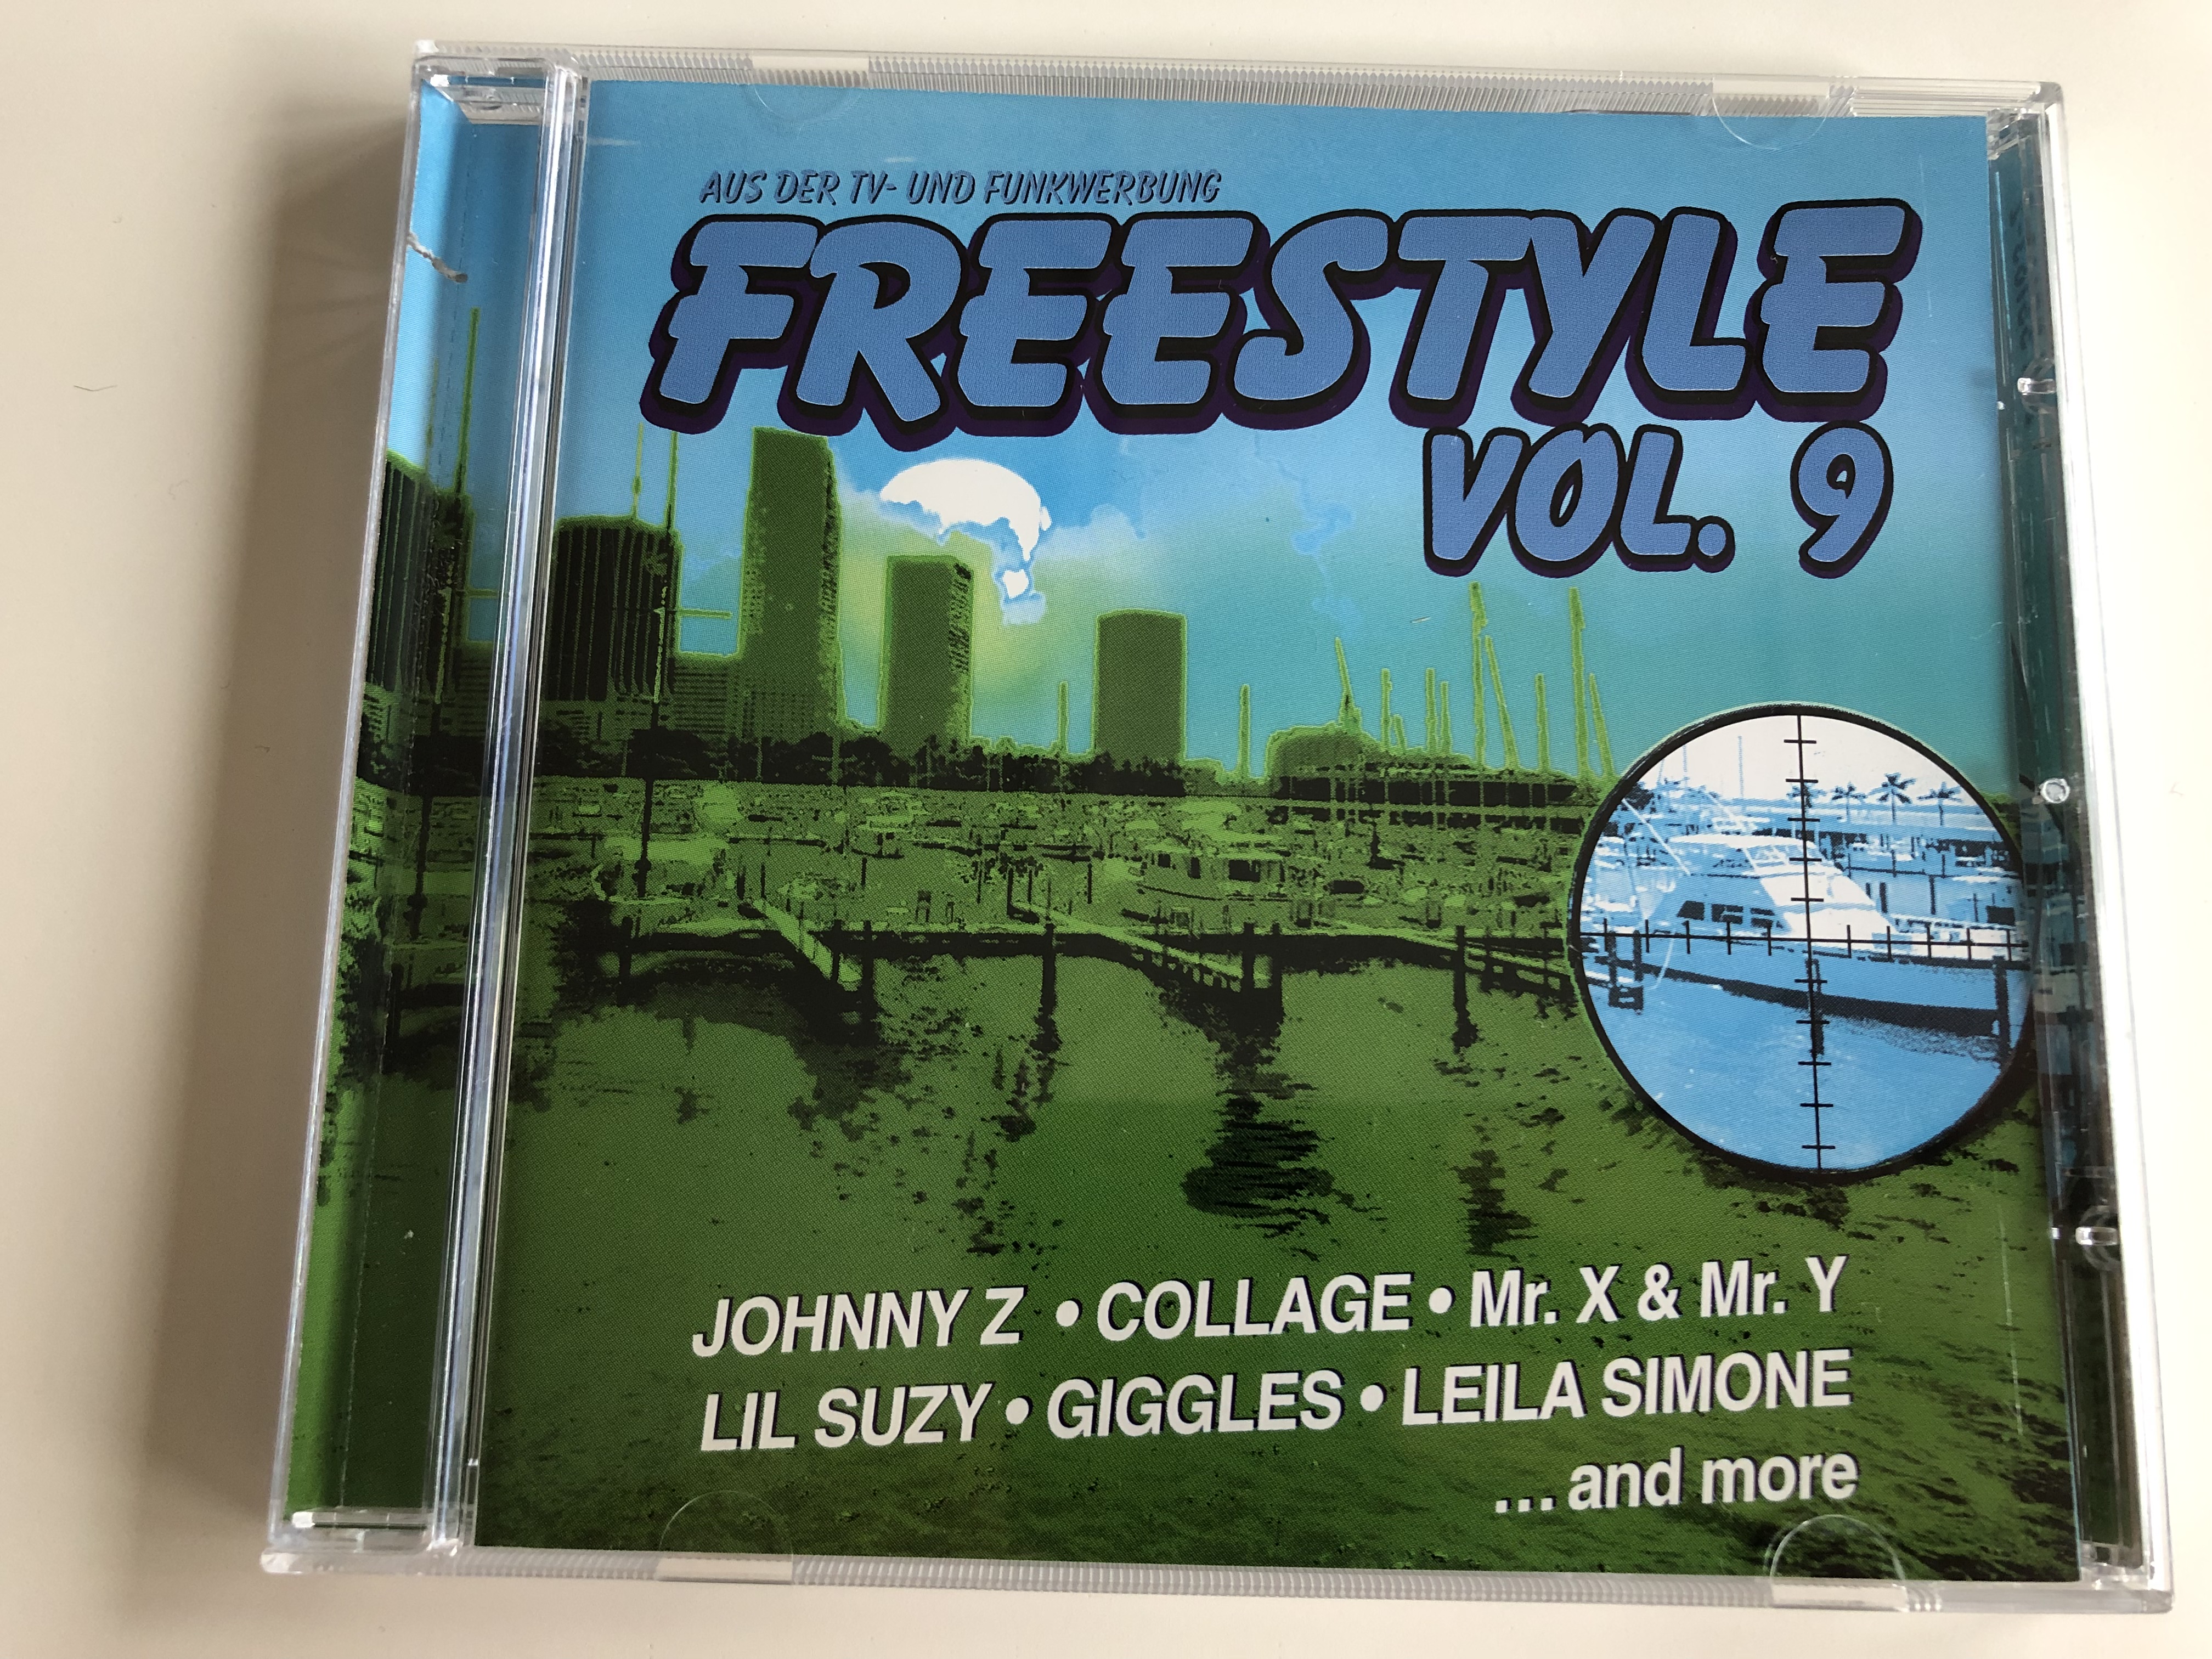 freestyle-vol.-9-johnny-z-collage-mr.-x-mr.-y-lil-suzy-giggles-leila-simone...-and-more-zyx-music-audio-cd-1999-zyx-55163-2-1-.jpg